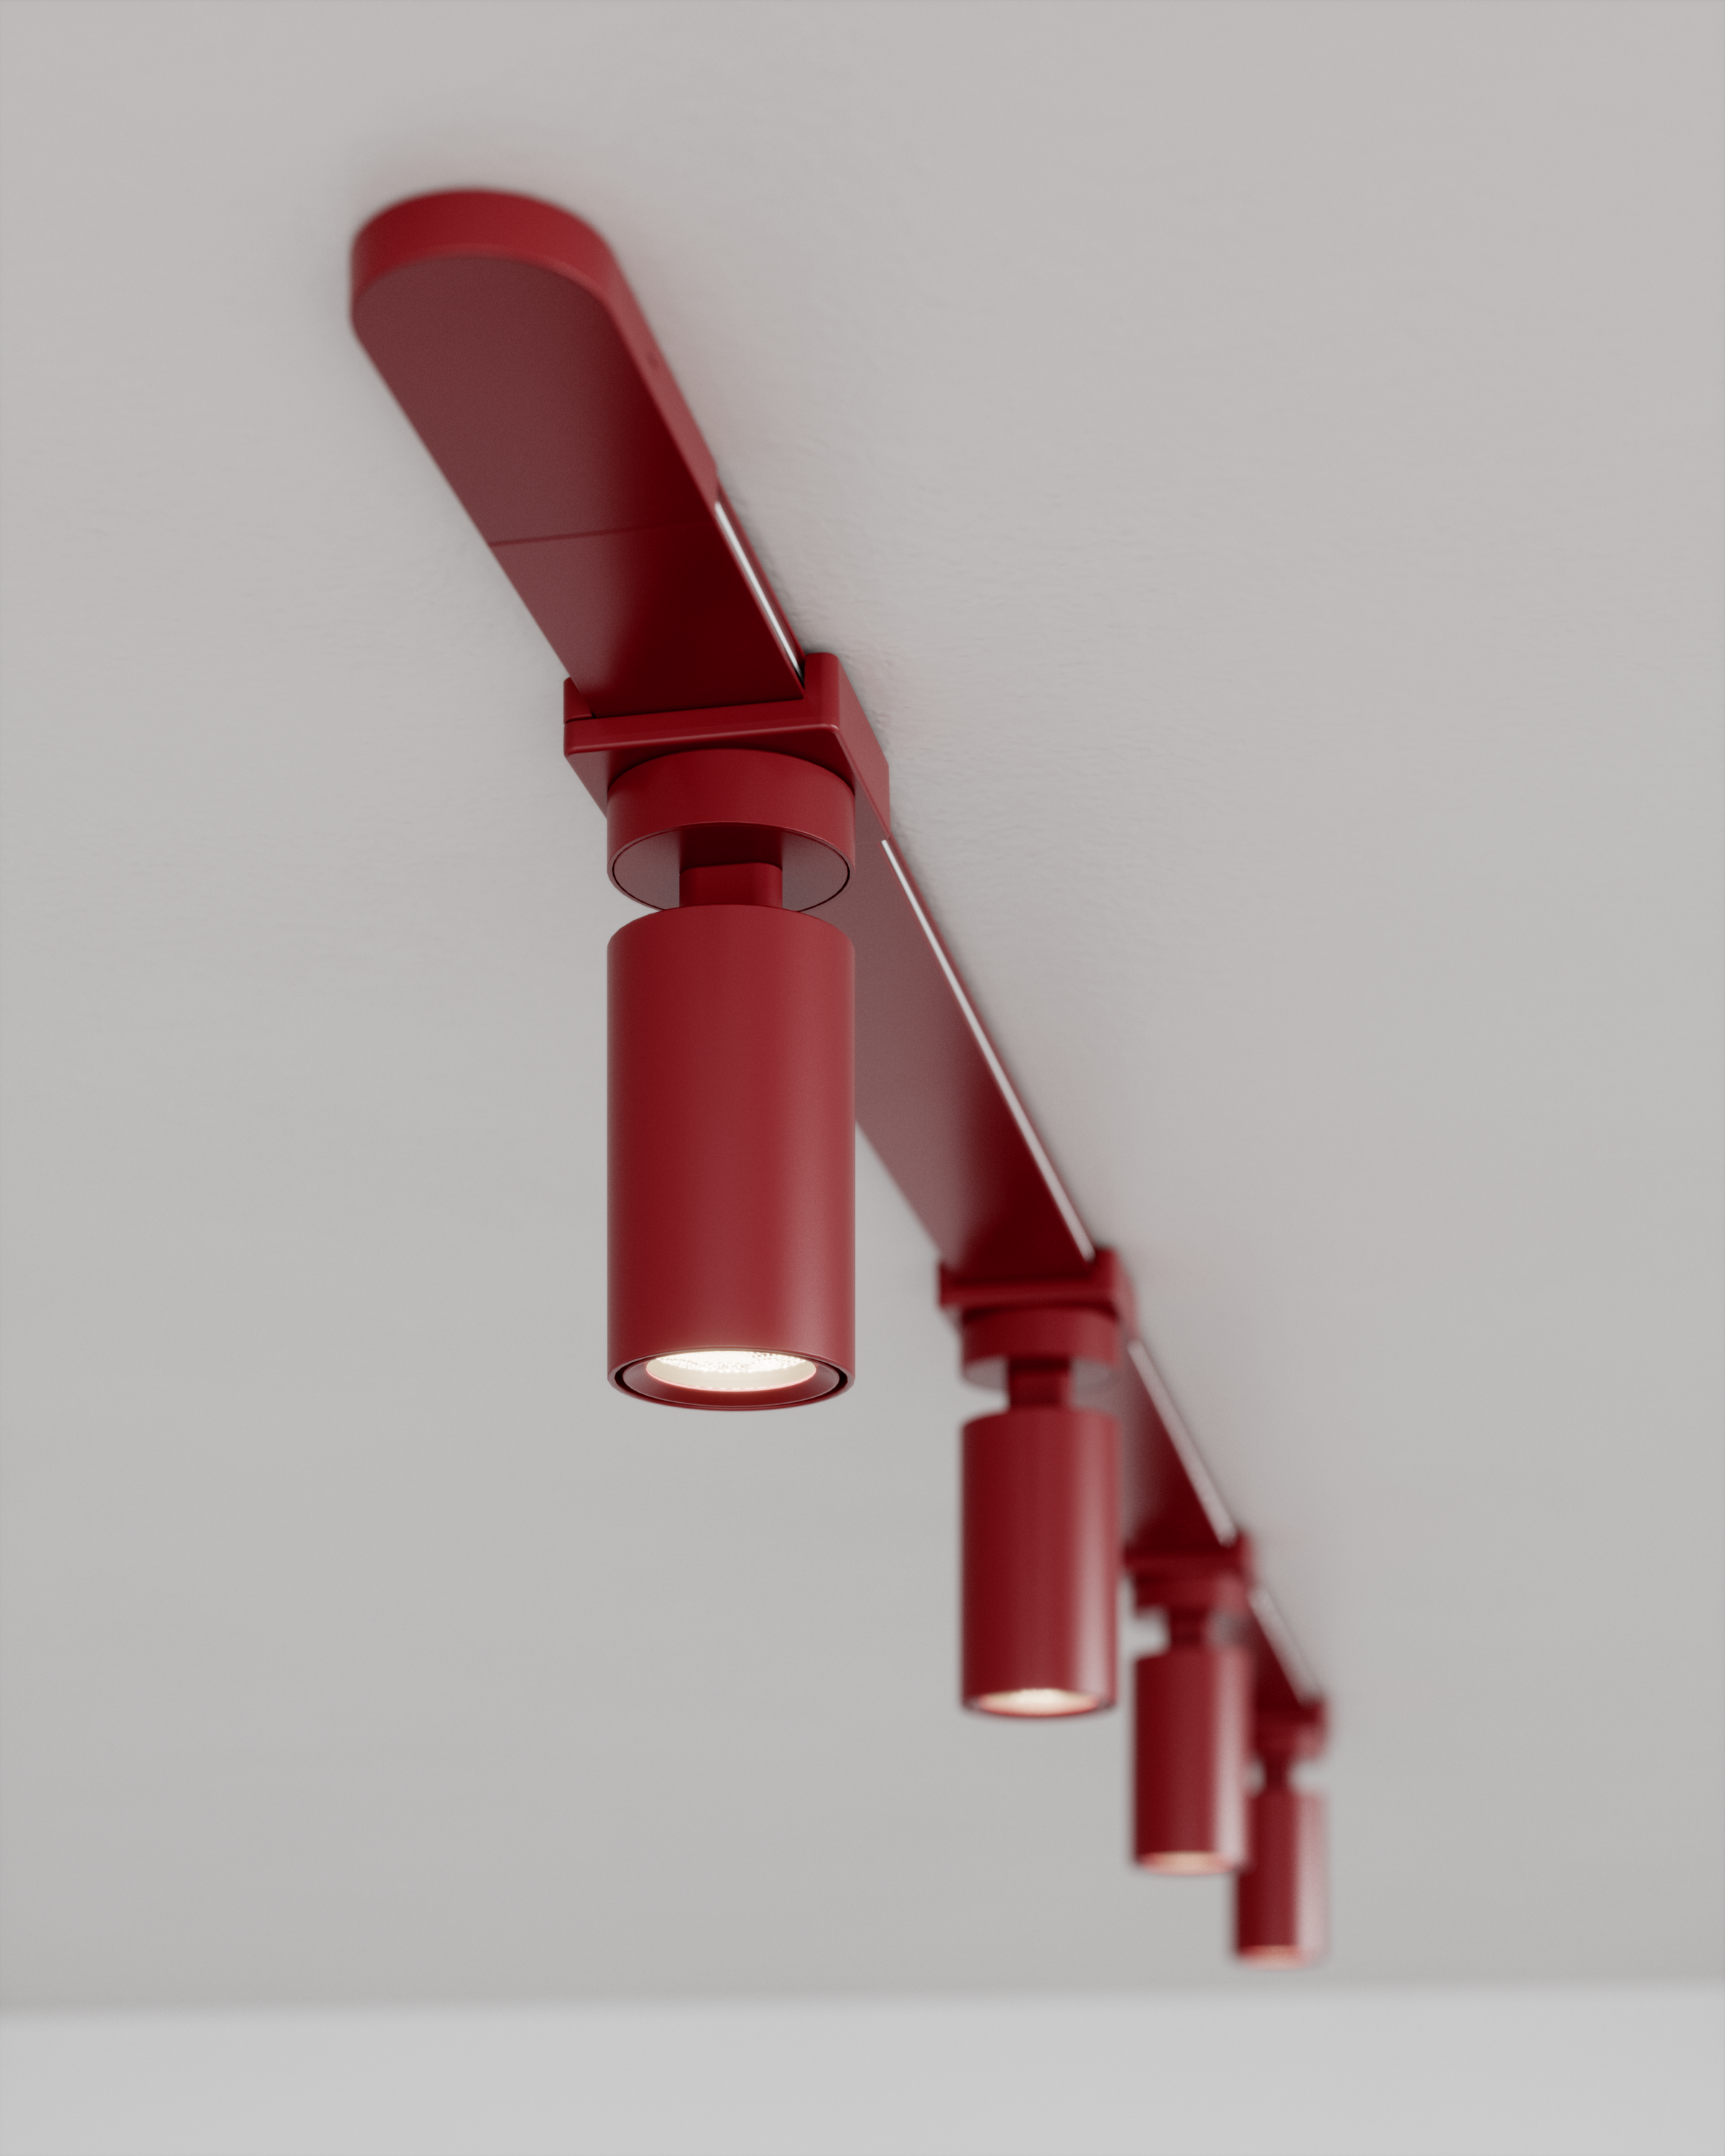 cleaning light fixtures - Axis T by Juniper